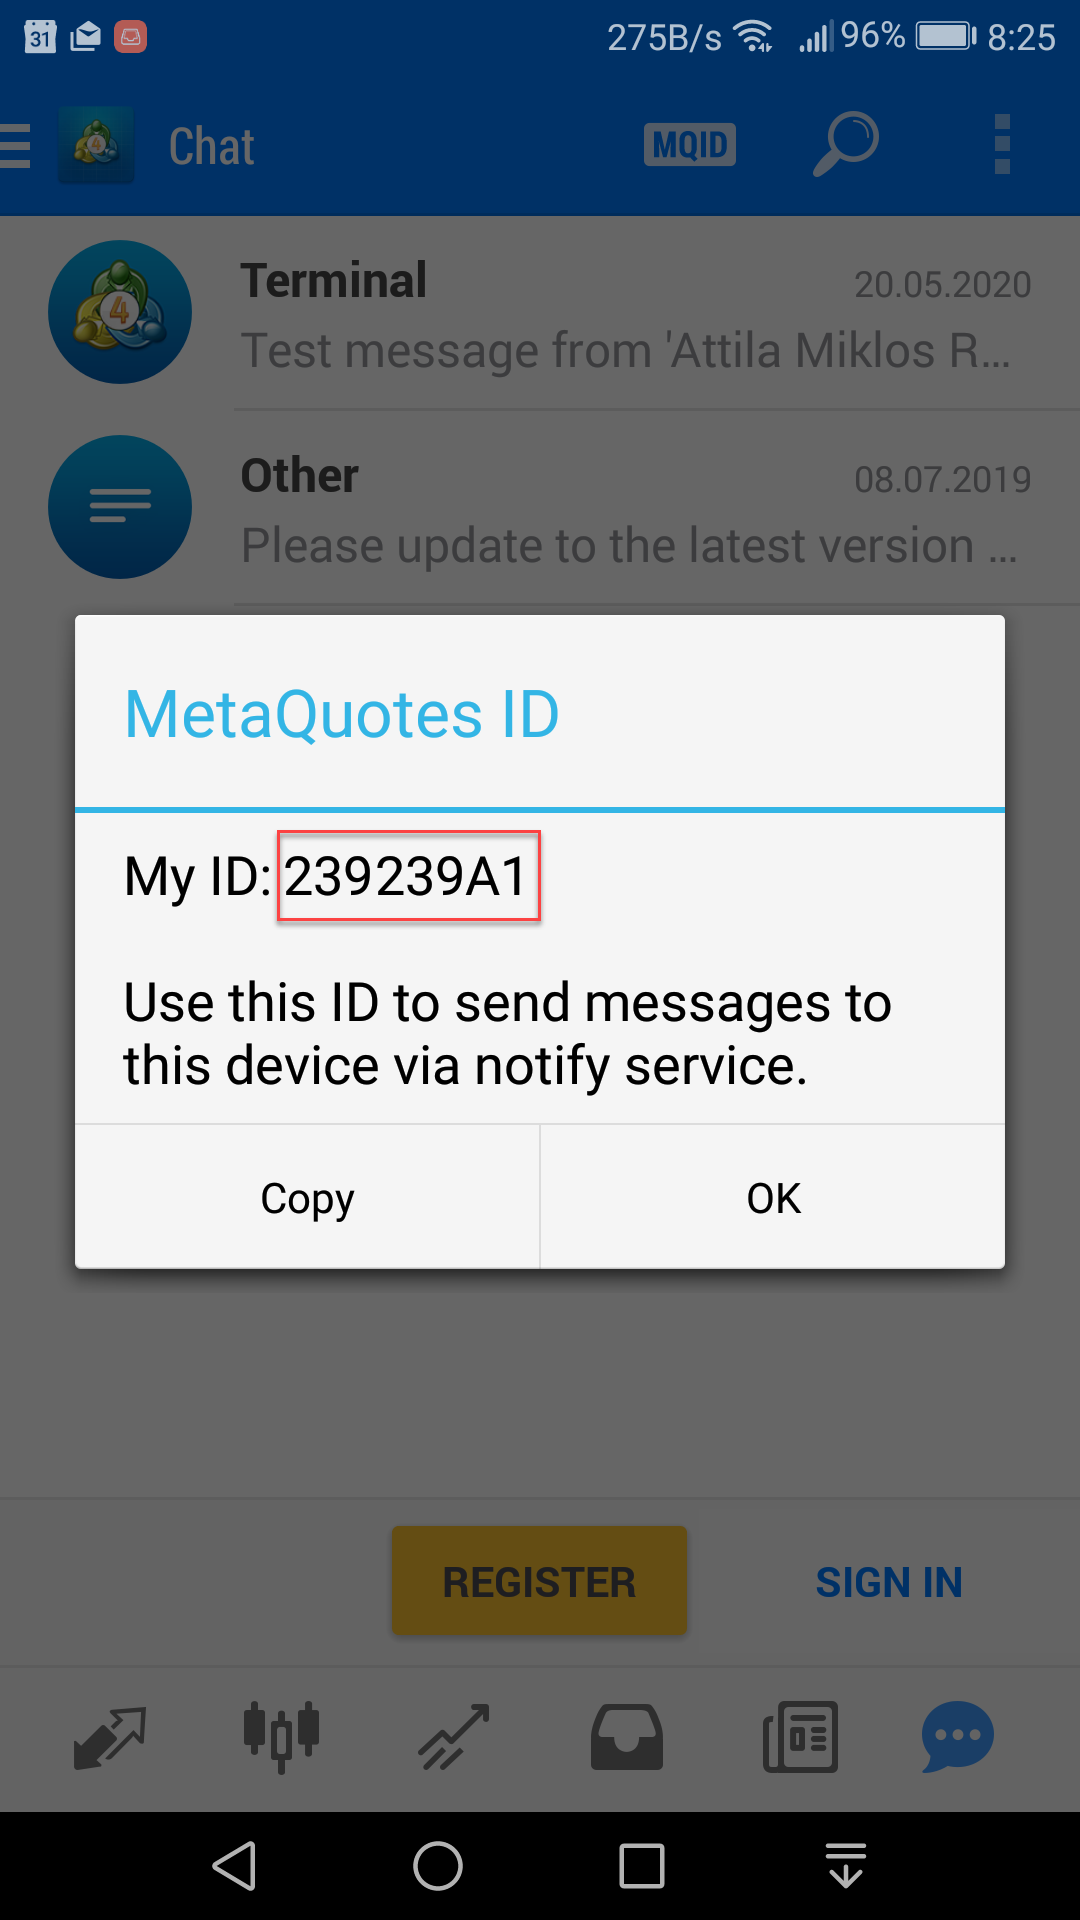 MetaQuotes ID